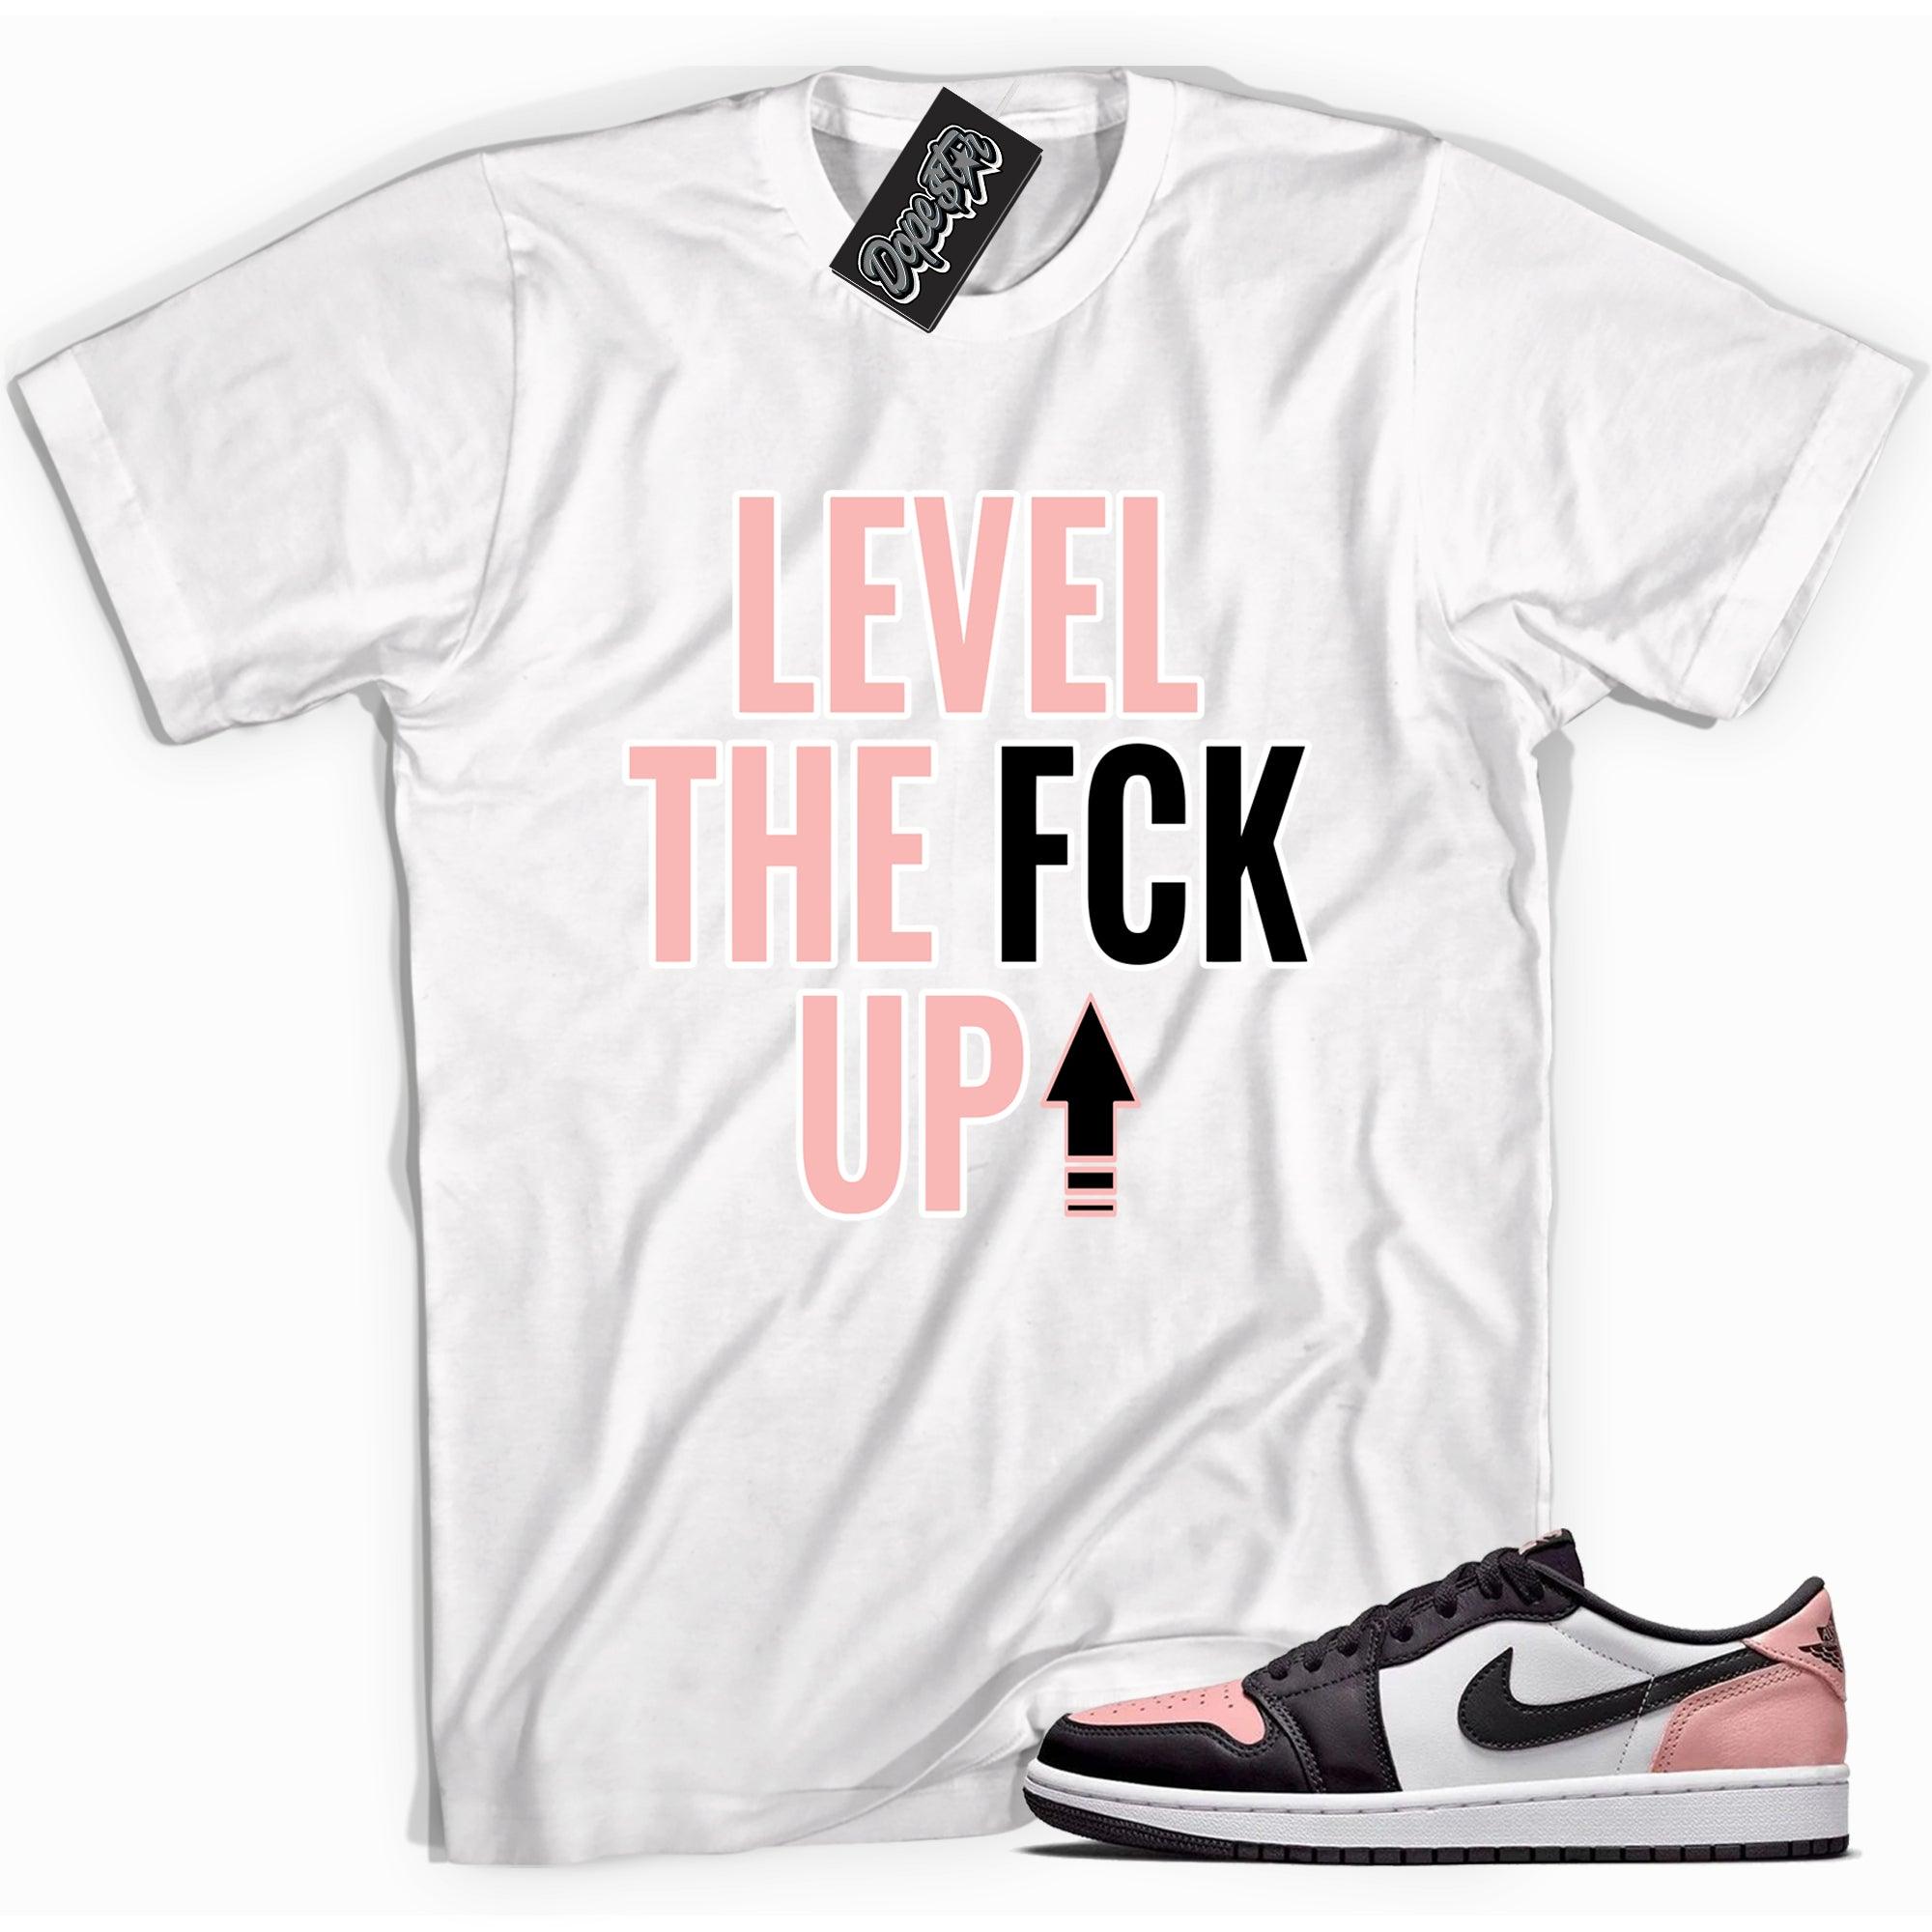 Cool white graphic tee with 'Level Up' print, that perfectly matches Air Jordan 1 Bleached Coral sneakers.